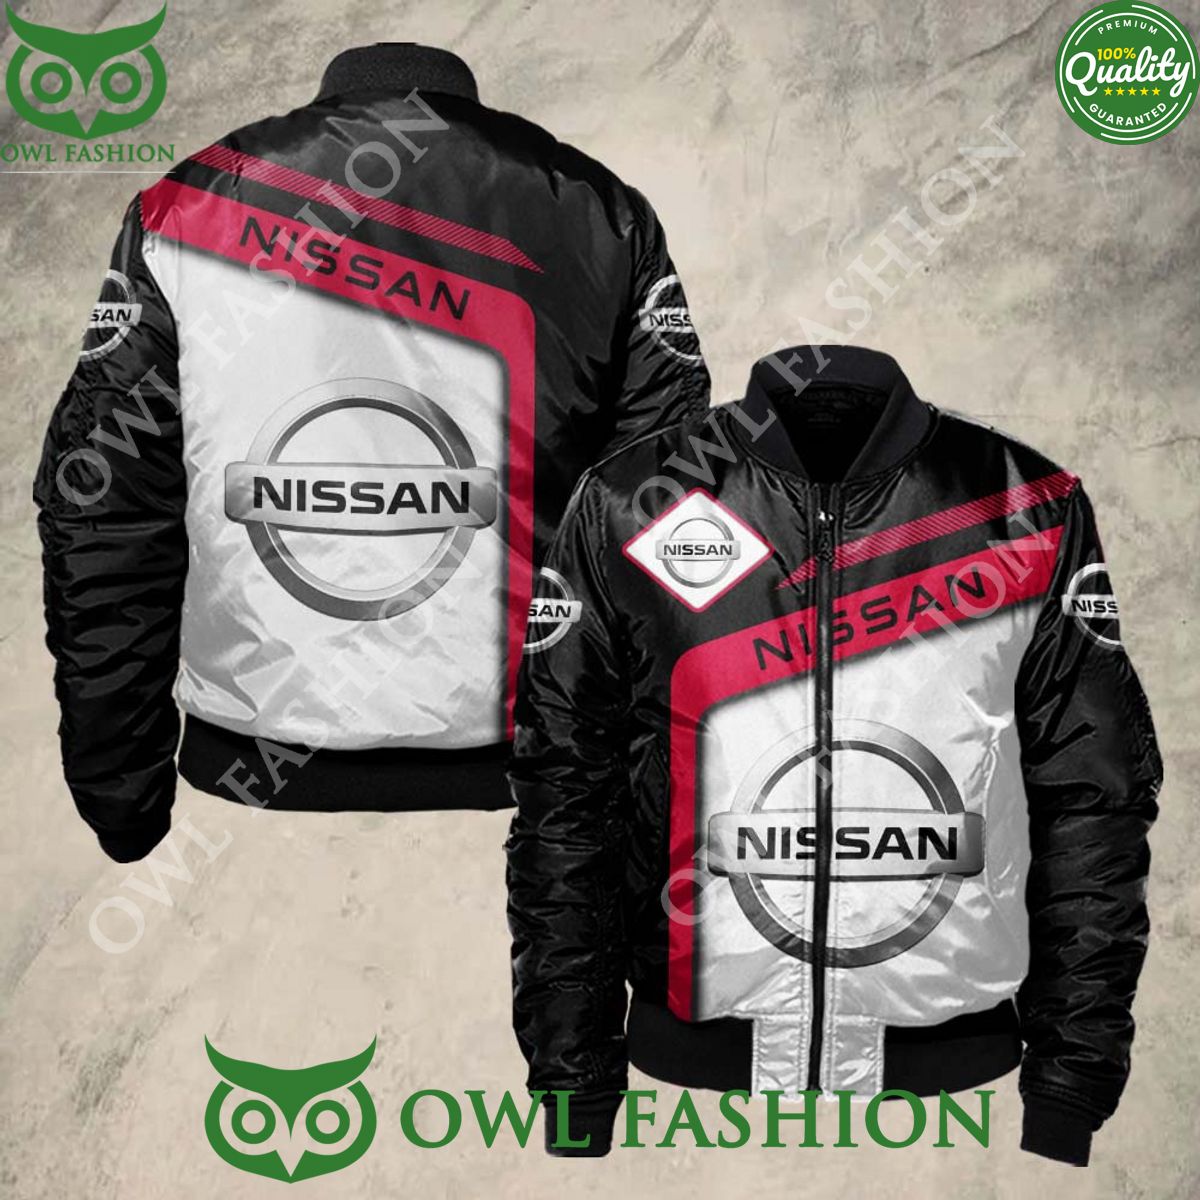 Trending Nissan Brand Bomber Jacket Printed It is too funny